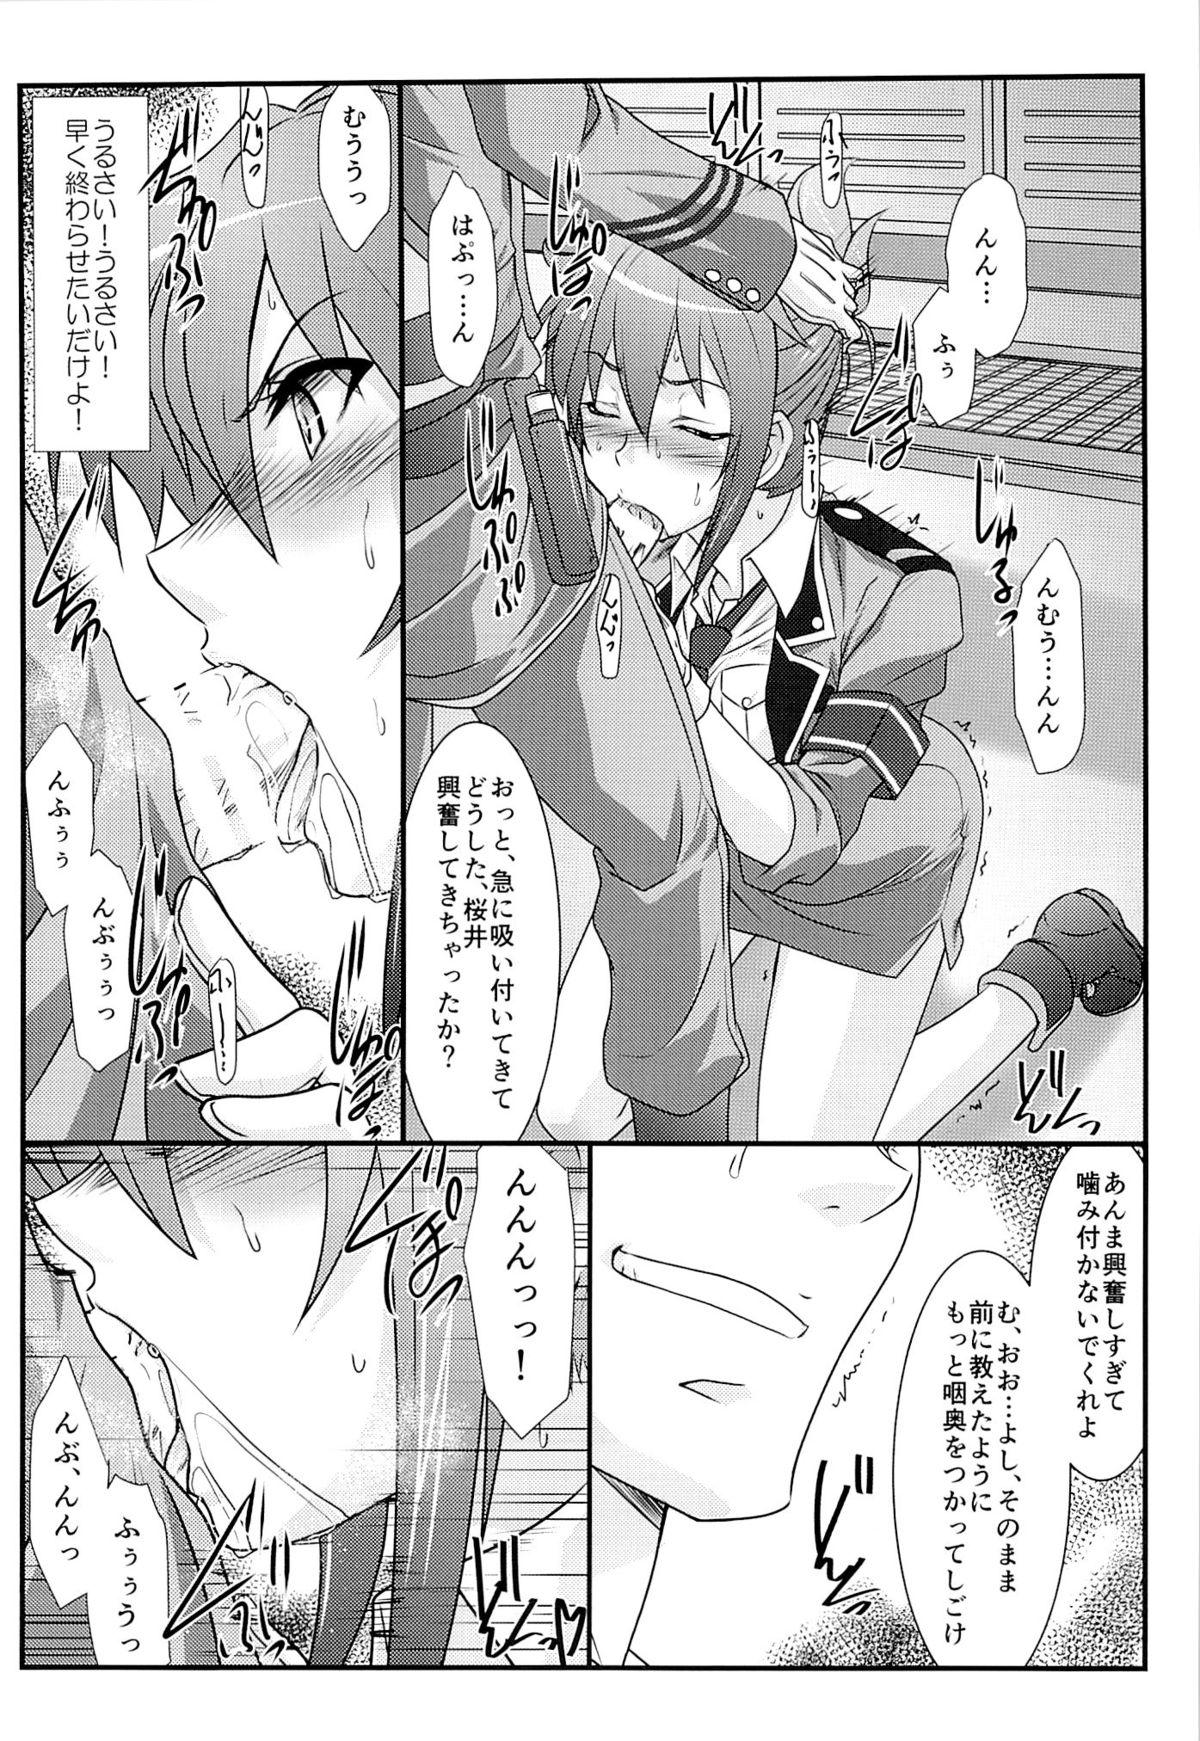 Gostosa Astral Bout Ver.30 - Rail wars Socks - Page 5